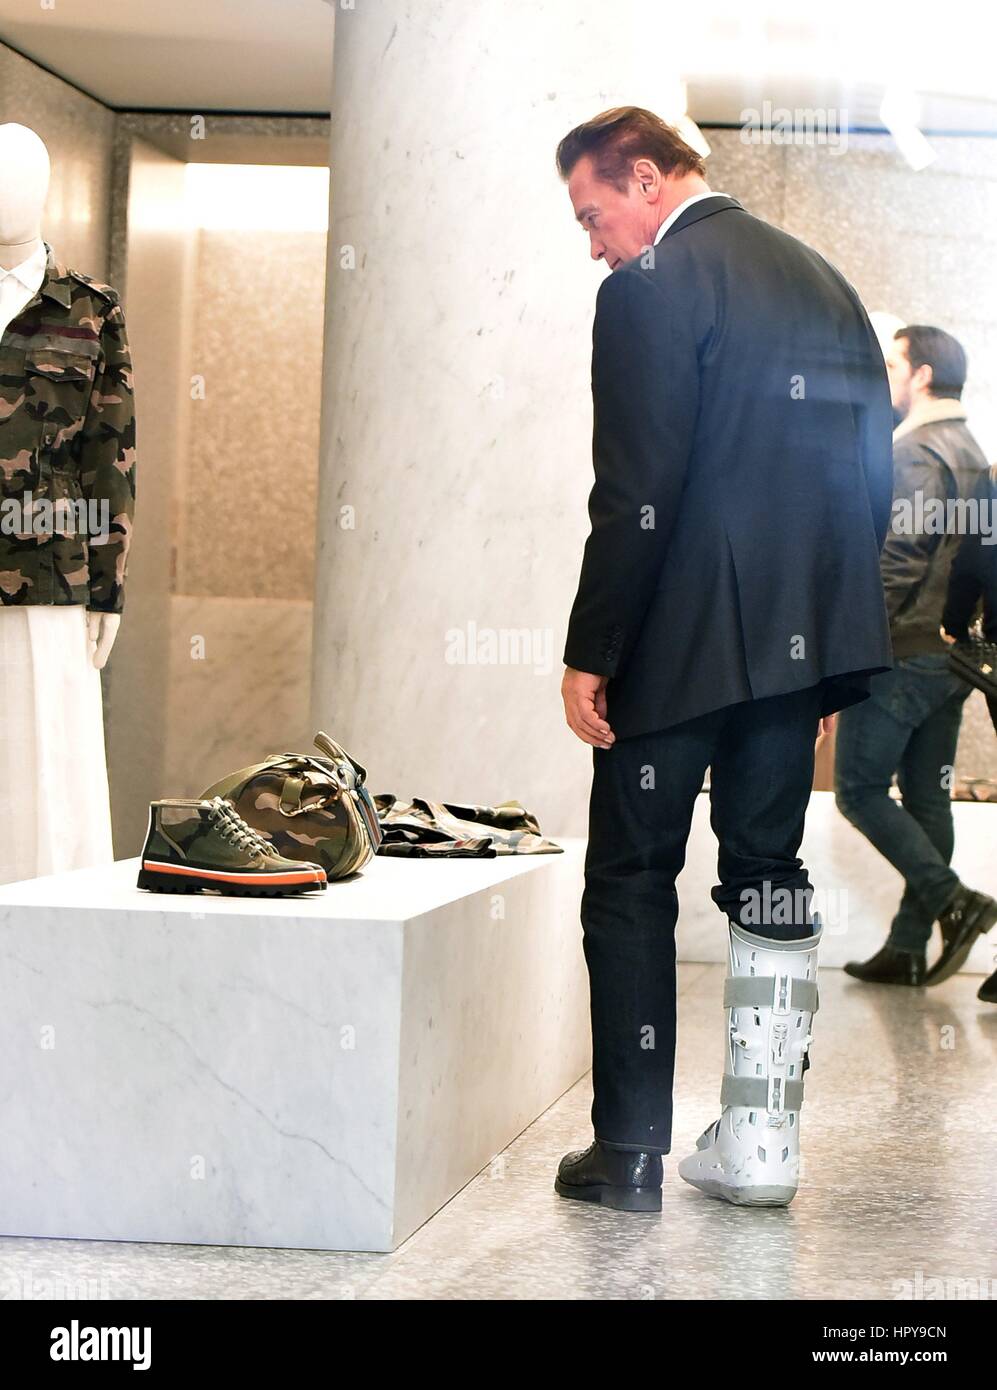 Arnold Schwarzenegger and his girlfriend Heather Milligan go shopping at various boutiques in Rome, Italy. Arnold is seen wearing a Air Shield Walker on his right leg and happily walks around the city centre.  Featuring: Arnold Schwarzenegger Where: Rome, Italy When: 25 Jan 2017 Credit: IPA/WENN.com  **Only available for publication in UK, USA, Germany, Austria, Switzerland** Stock Photo